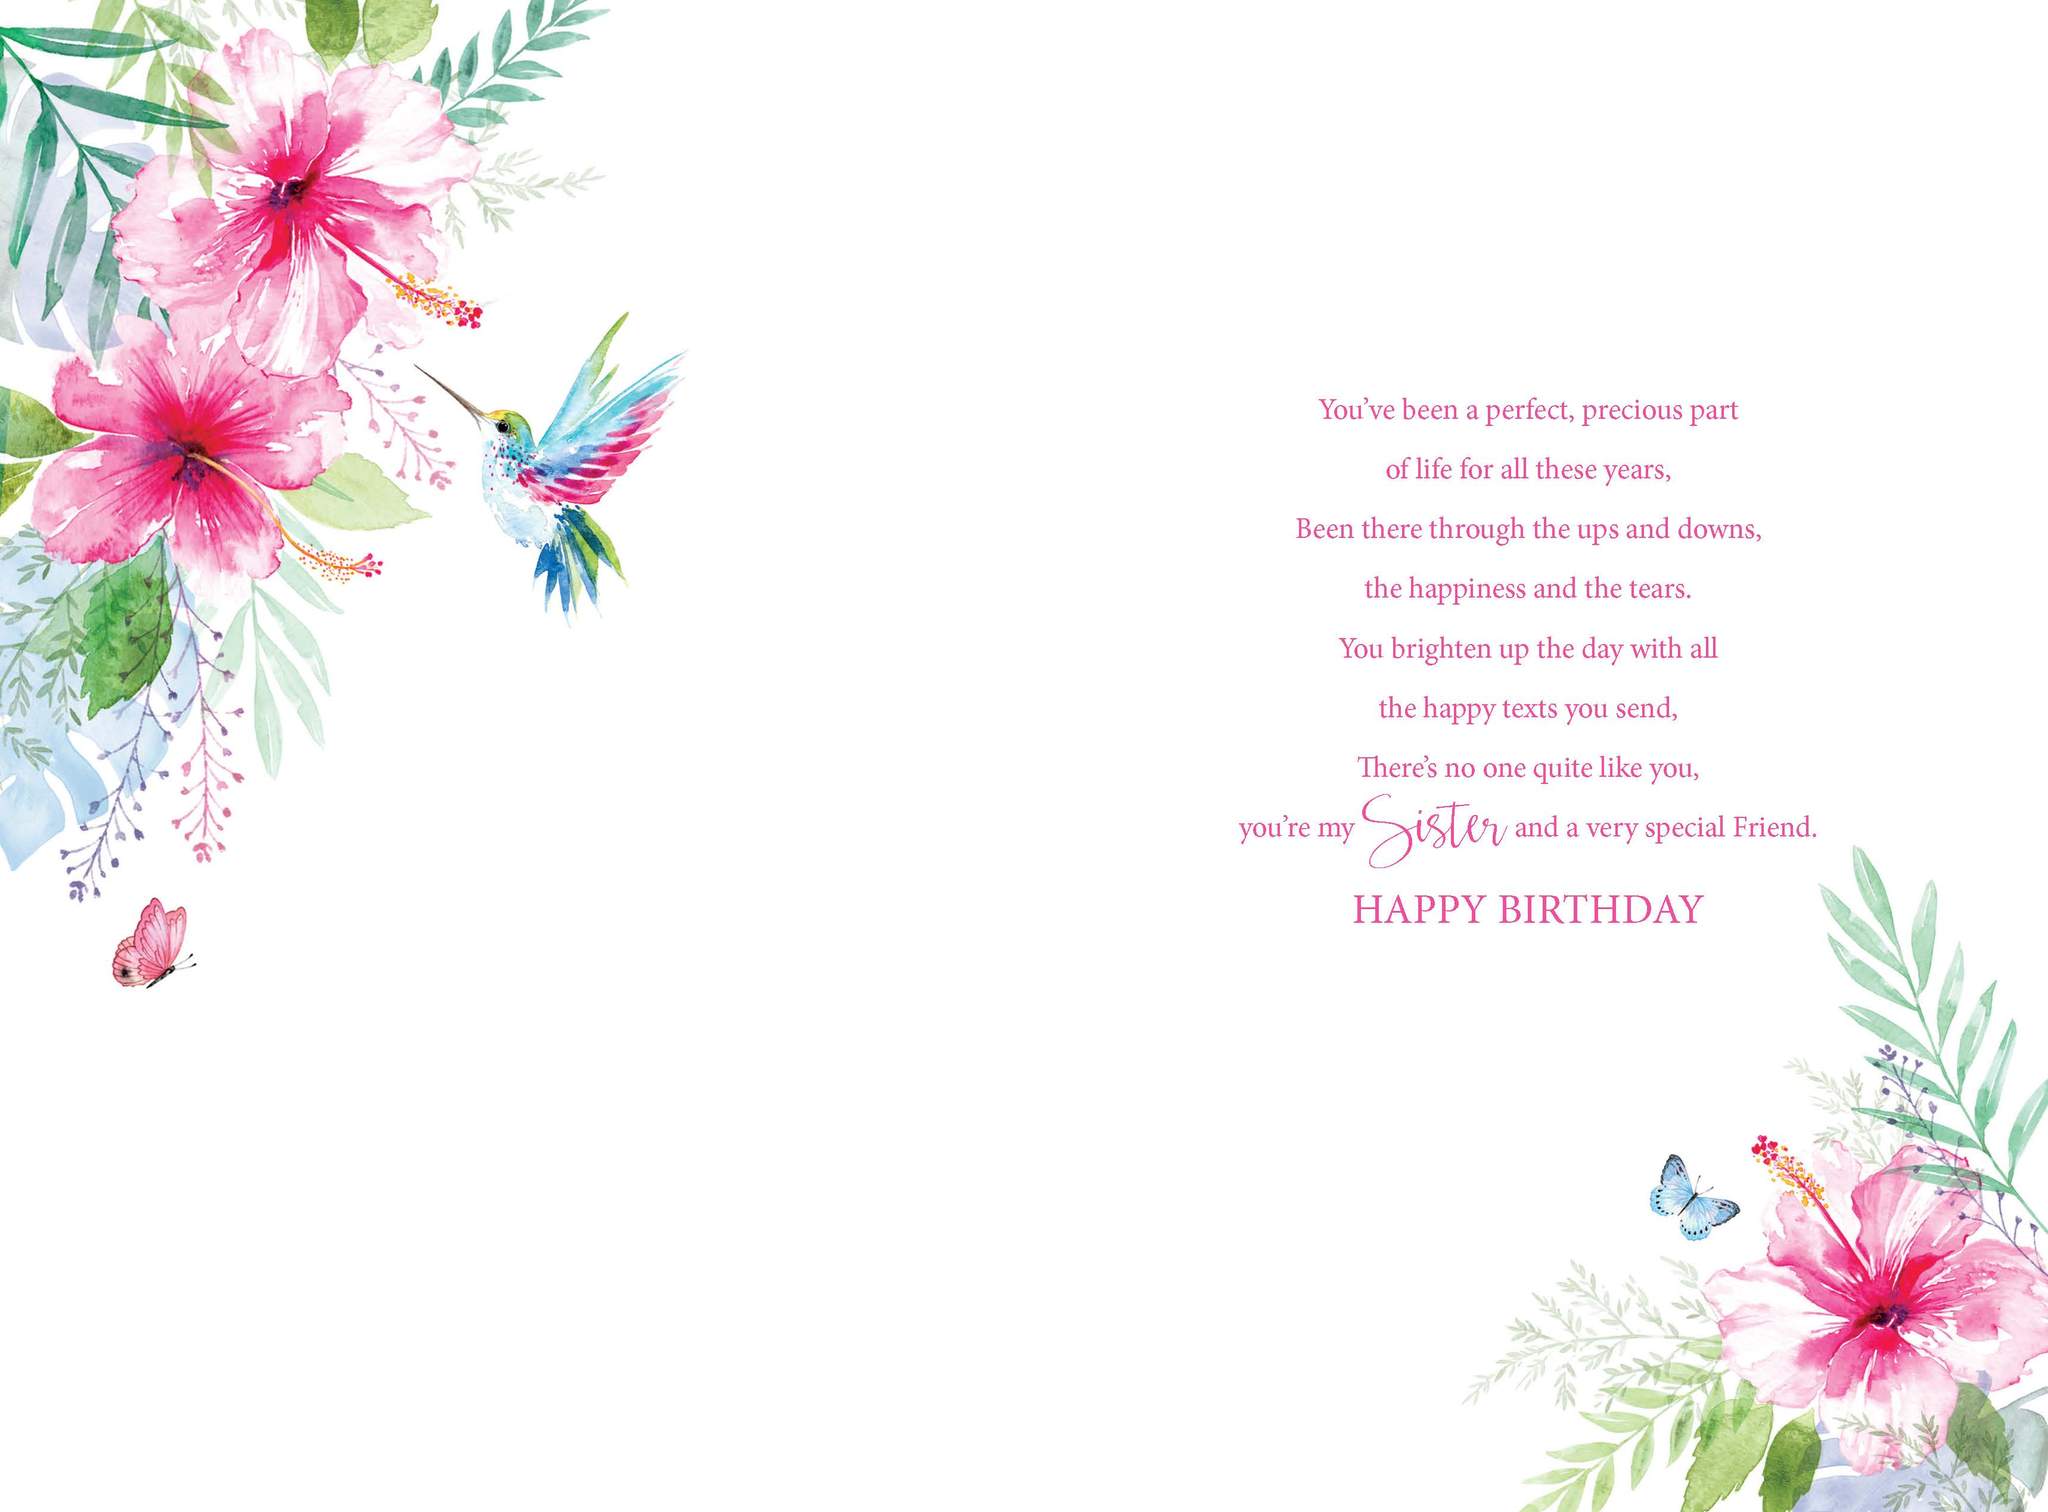 Sister Birthday Card - Kingfisher With Hibiscus